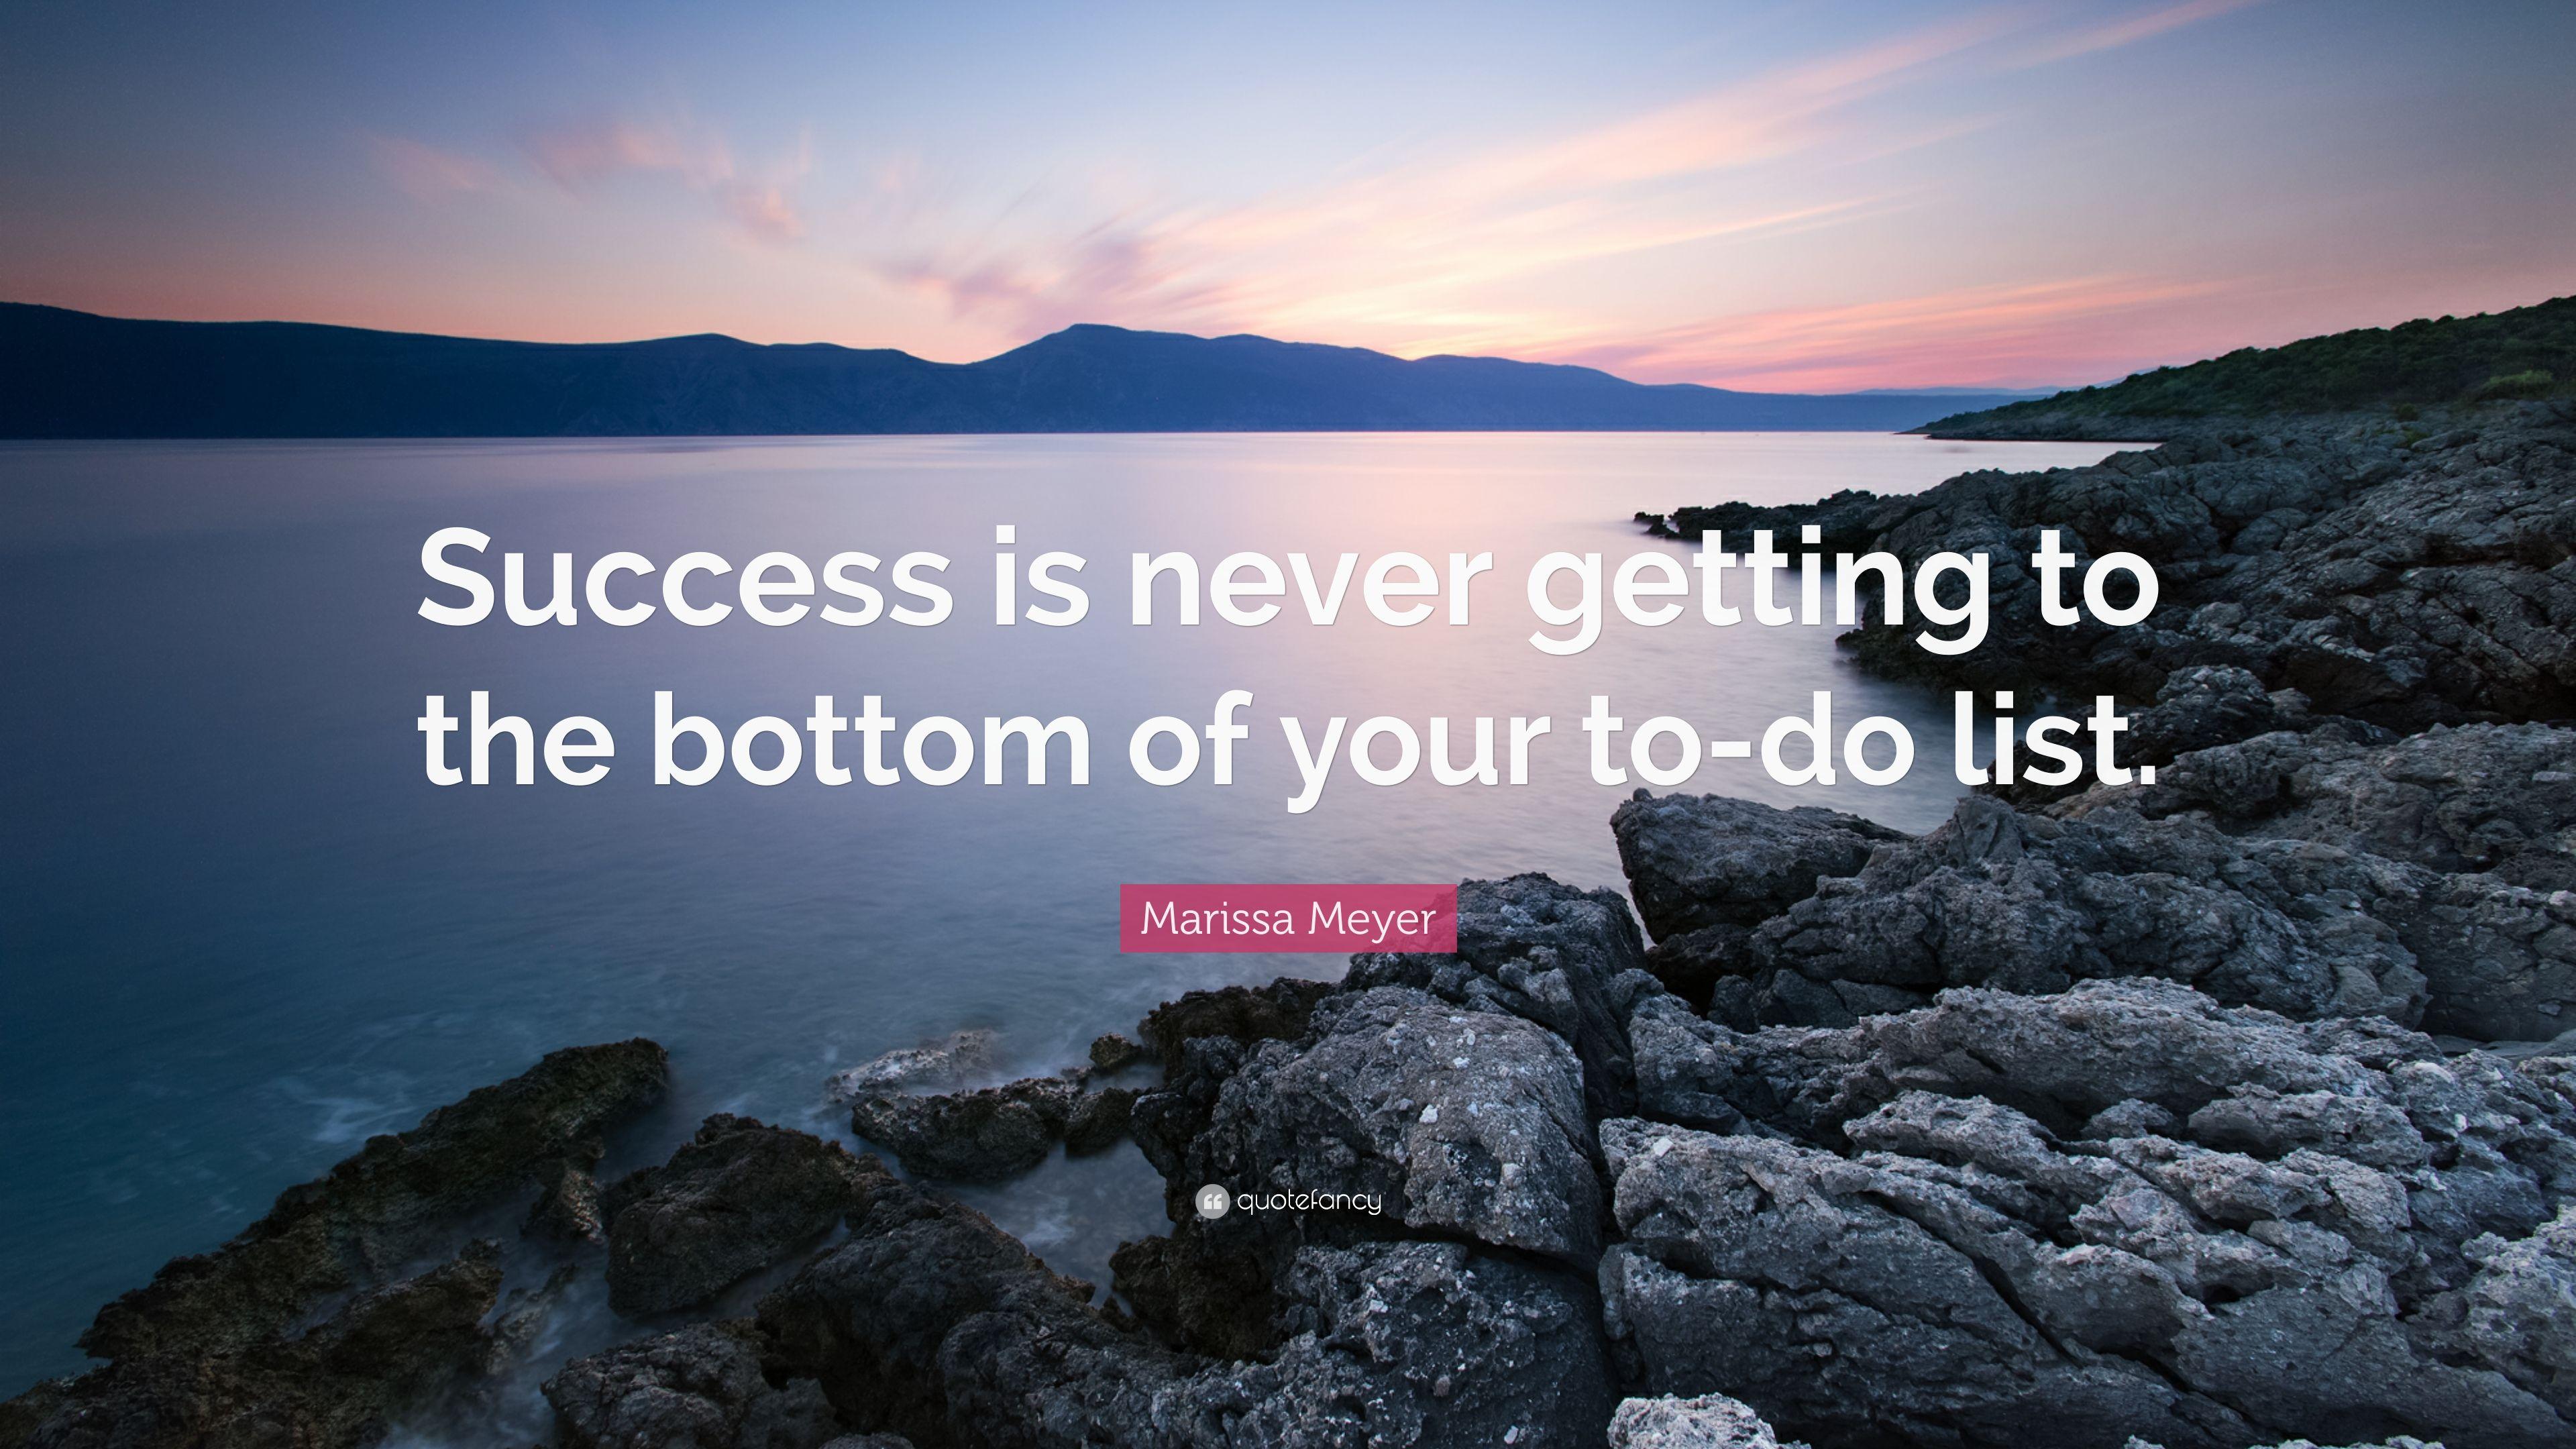 Marissa Meyer Quote: “Success is never getting to the bottom of your